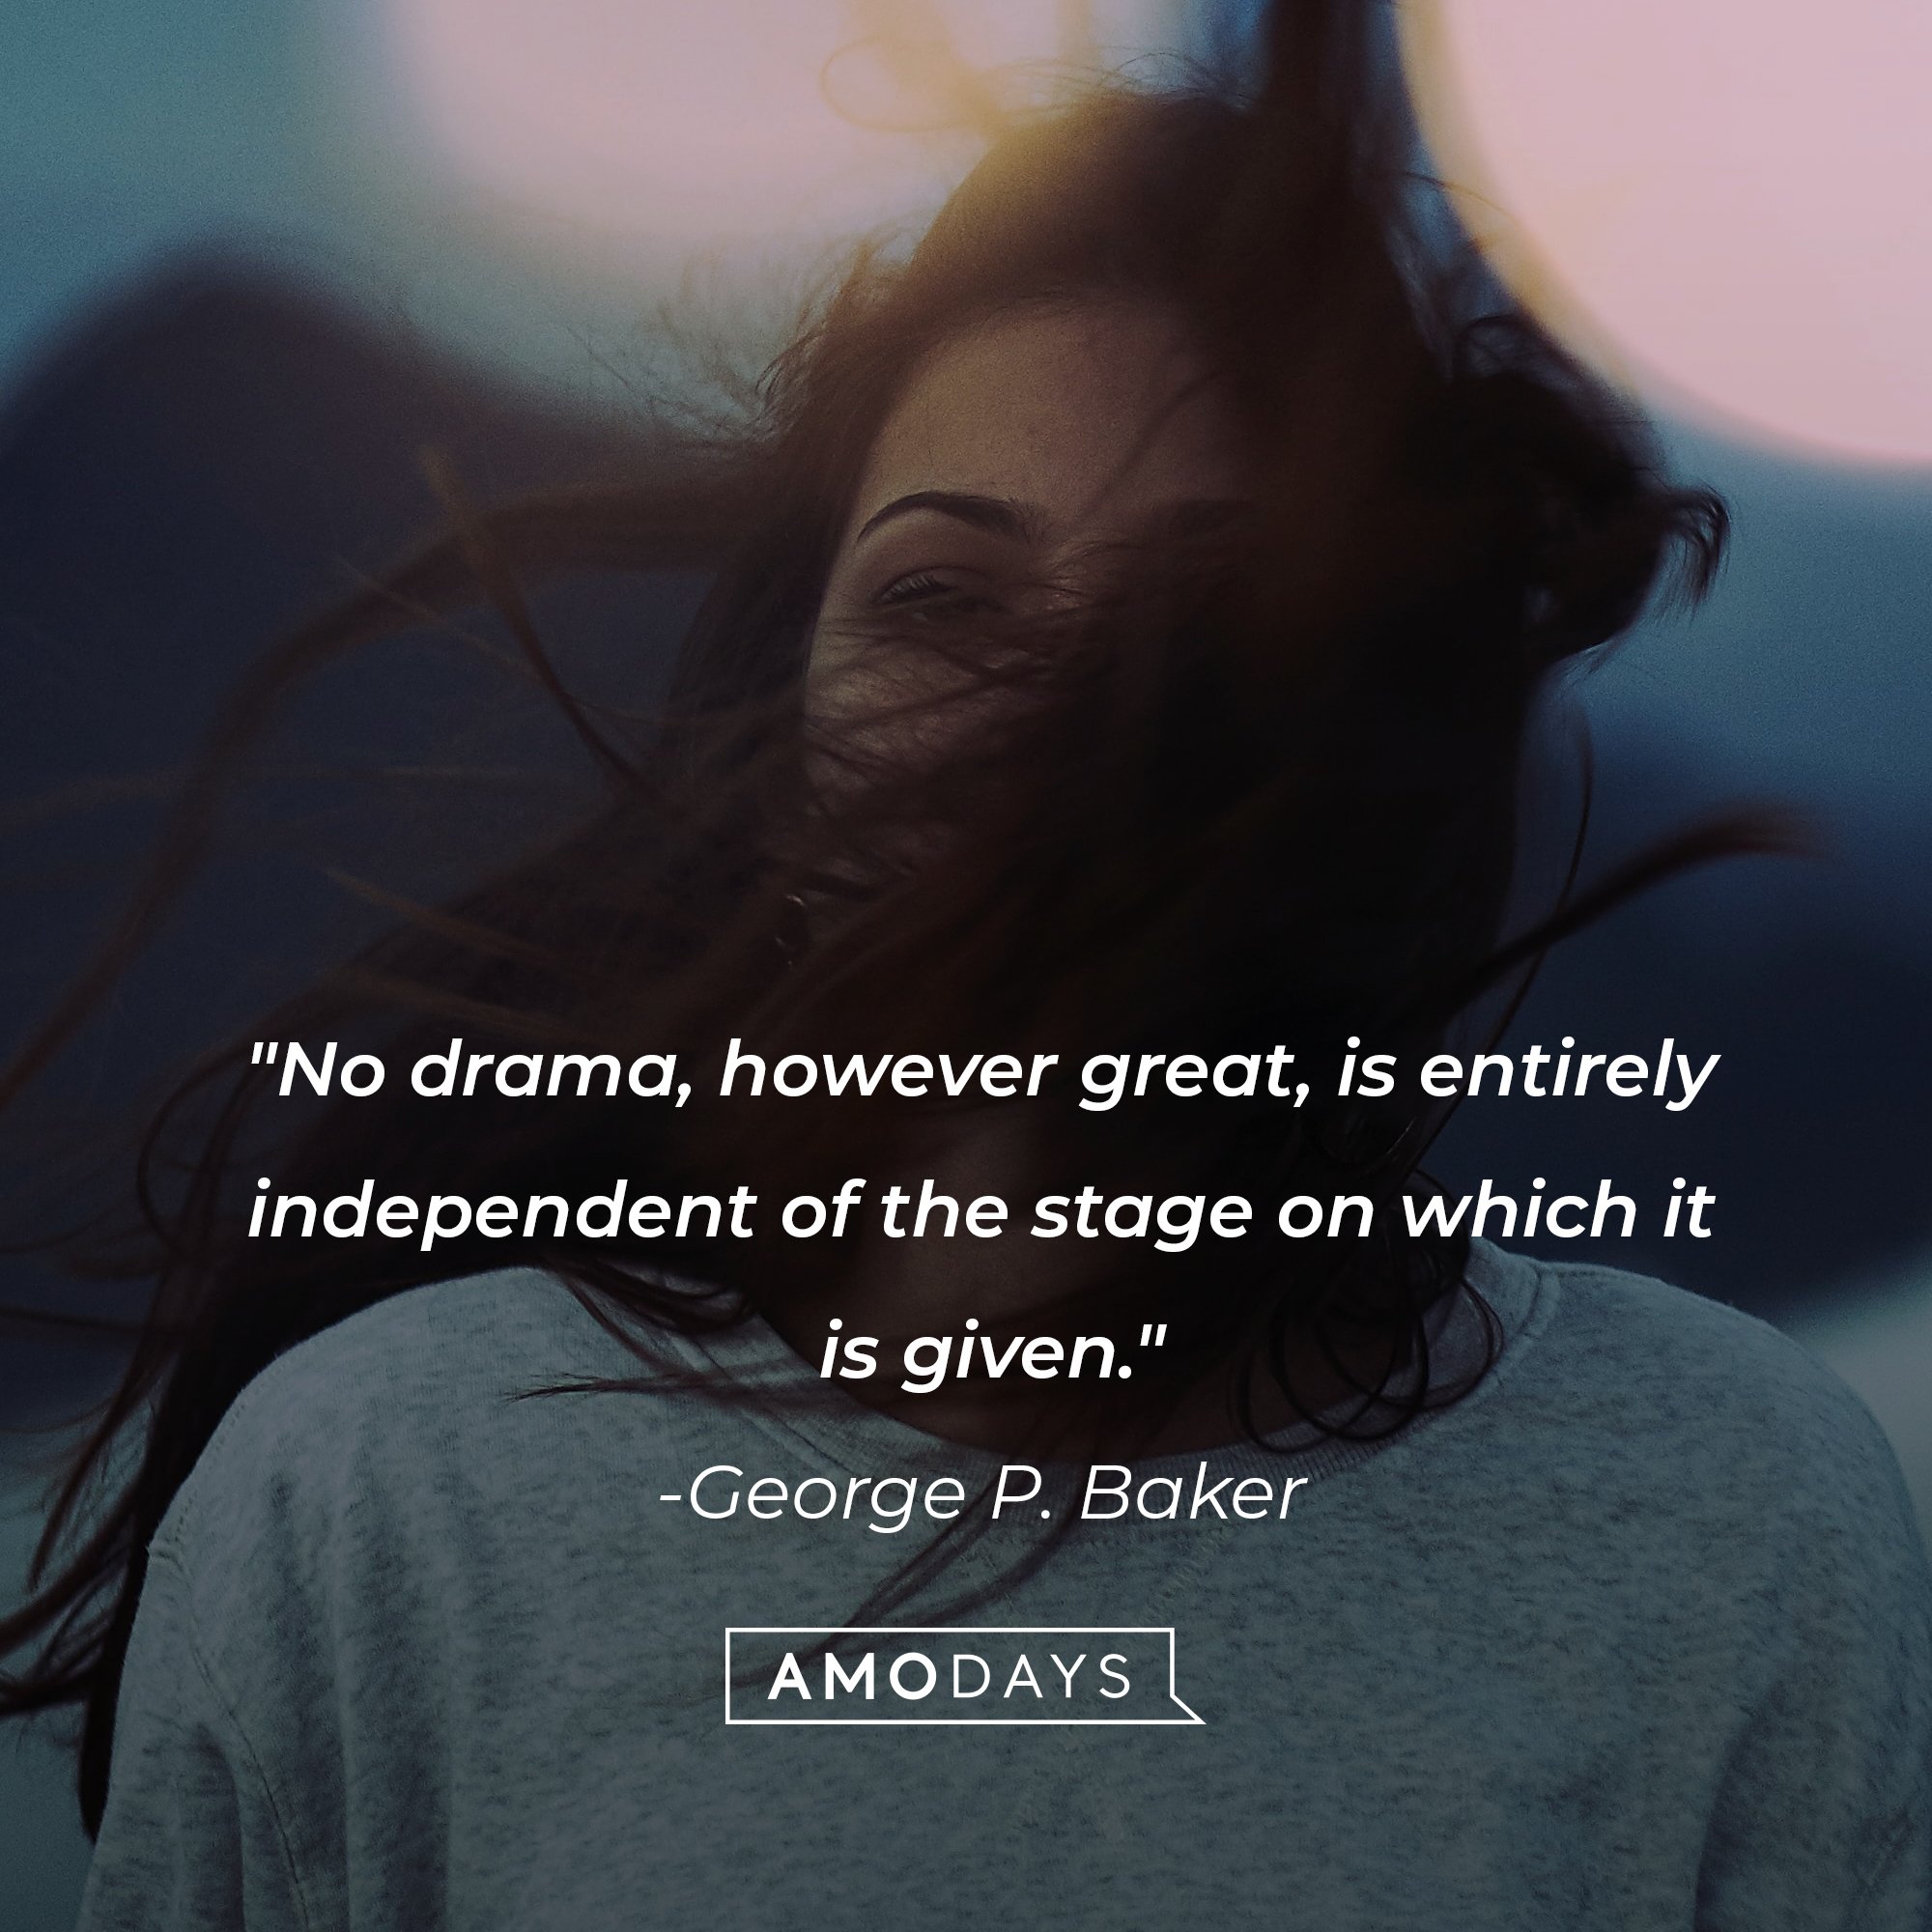 George P. Baker’s quote: "No drama, however great, is entirely independent of the stage on which it is given."  | Image: AmoDays 